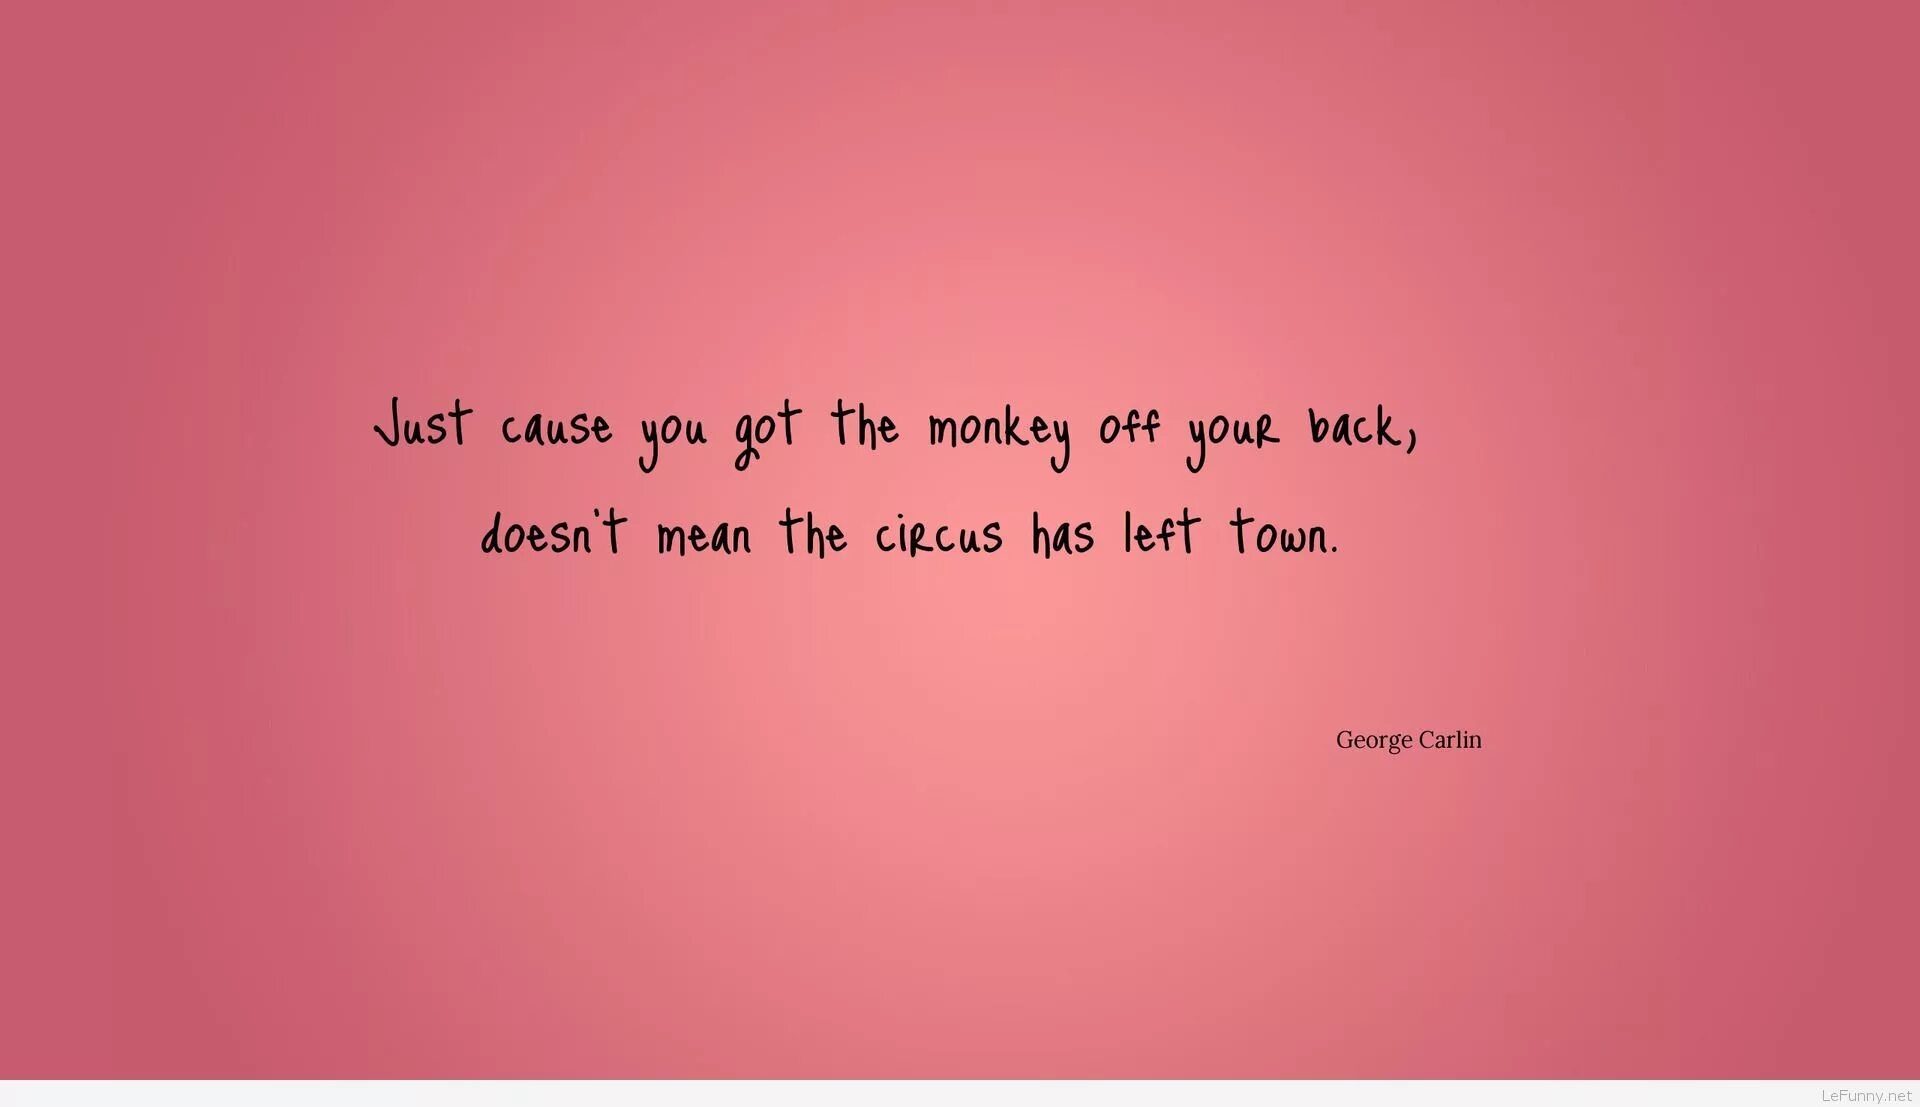 Cause you re the best. Funny quotes. Funny sayings Wallpaper. Quote Monkey. Meaning Wallpaper.